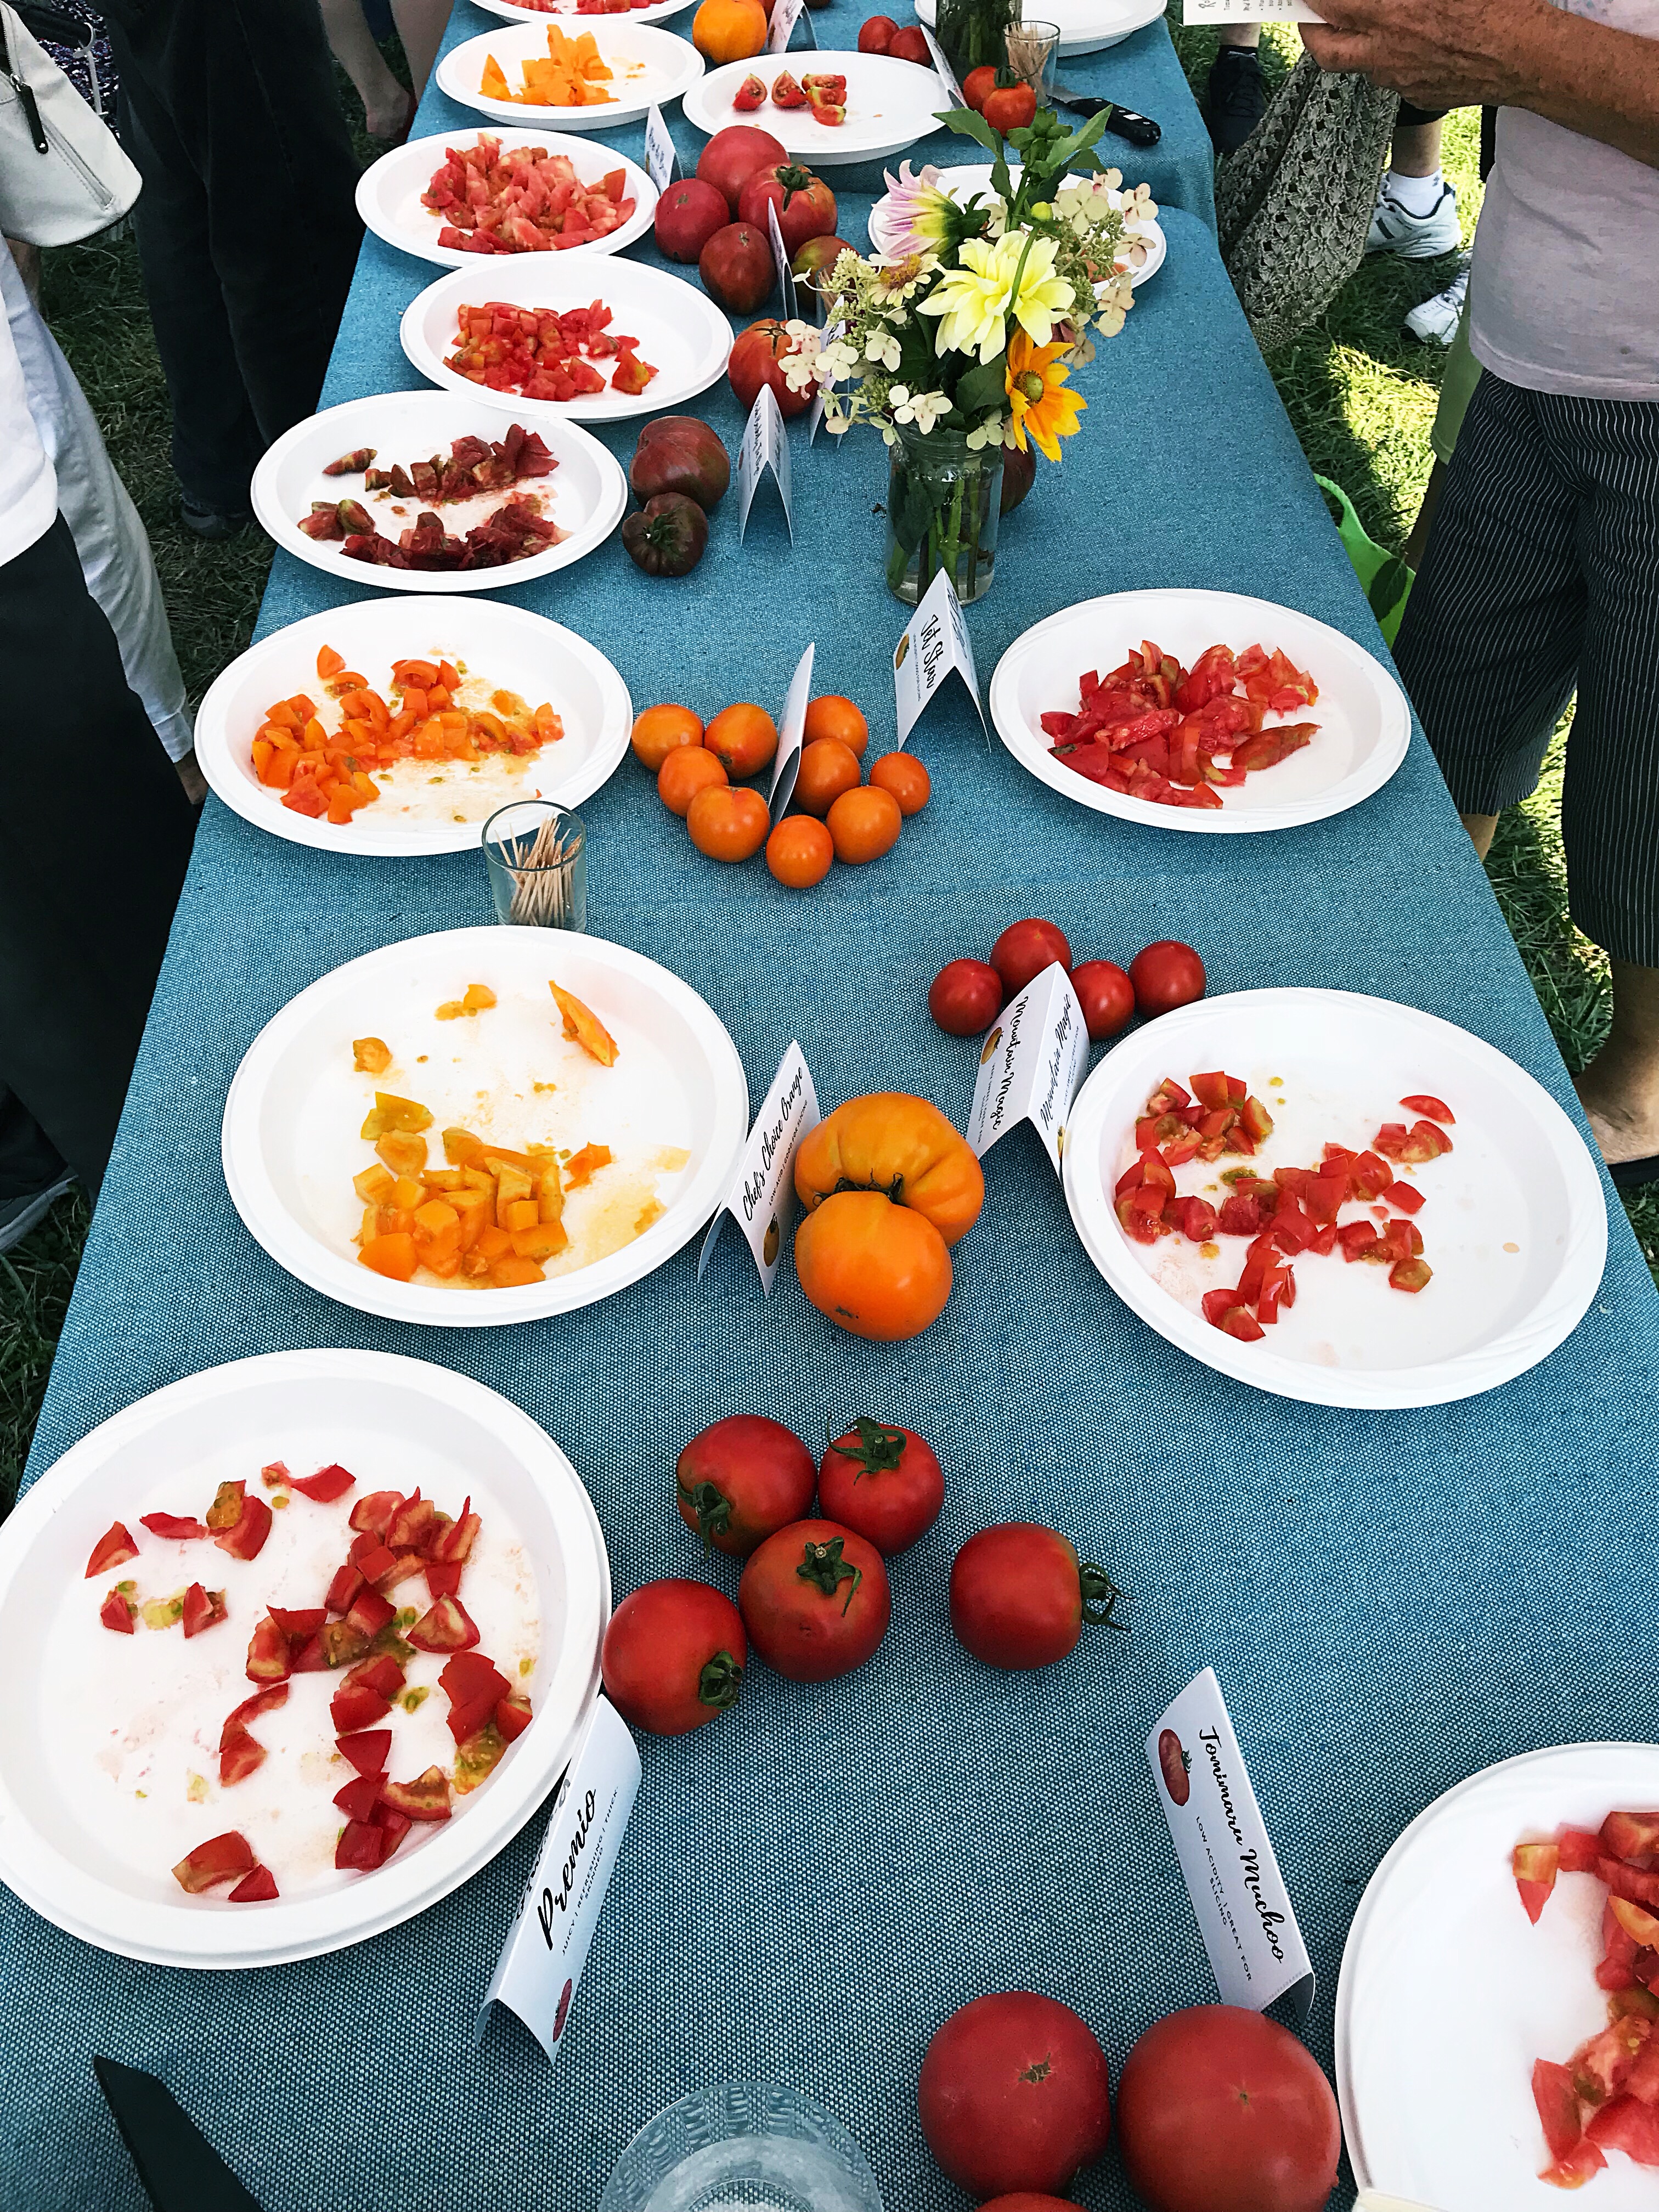 Showcase your best tasting heirloom tomatoes with a tomato tasting party! This post includes a FREE PRINTABLE Event Planning Guide, Tomato Tasting Note Cards and Tomato Labels